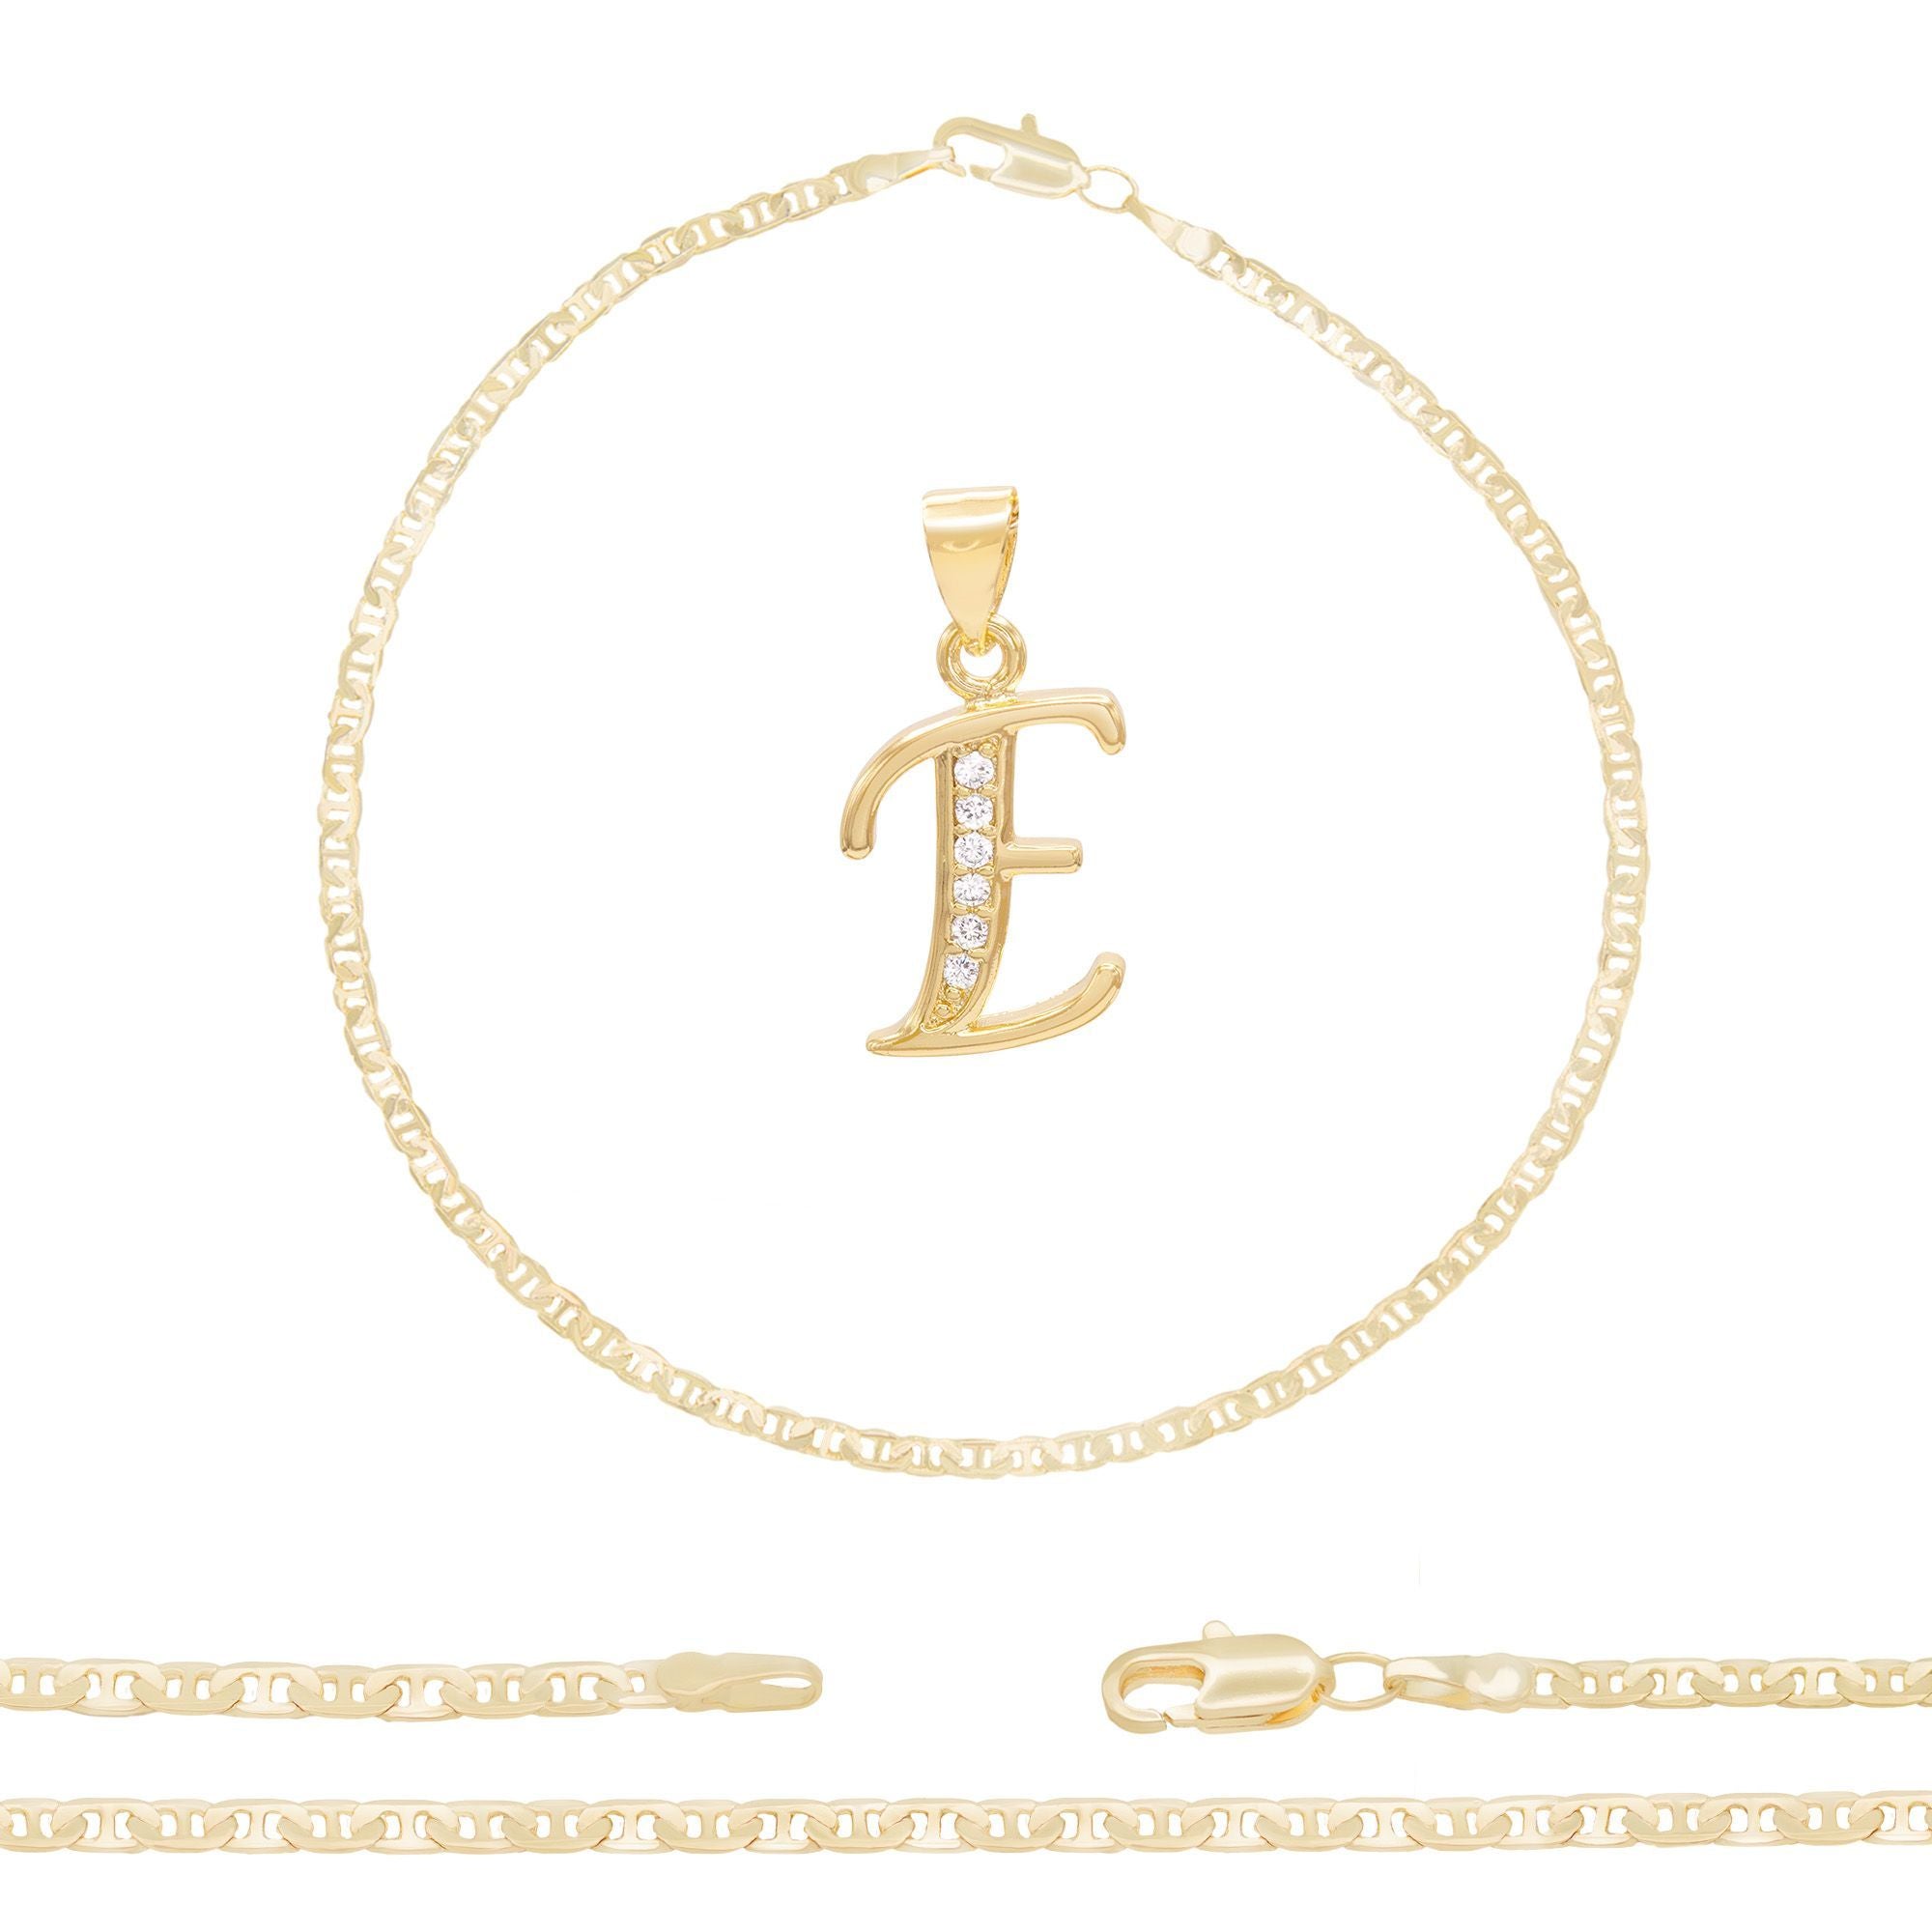 A-Z Initial Letter Pendant 14K Gold Filled Cubic Zirconia Mariner Chain Anklet 10" Set 3 mm  Women Jewelry